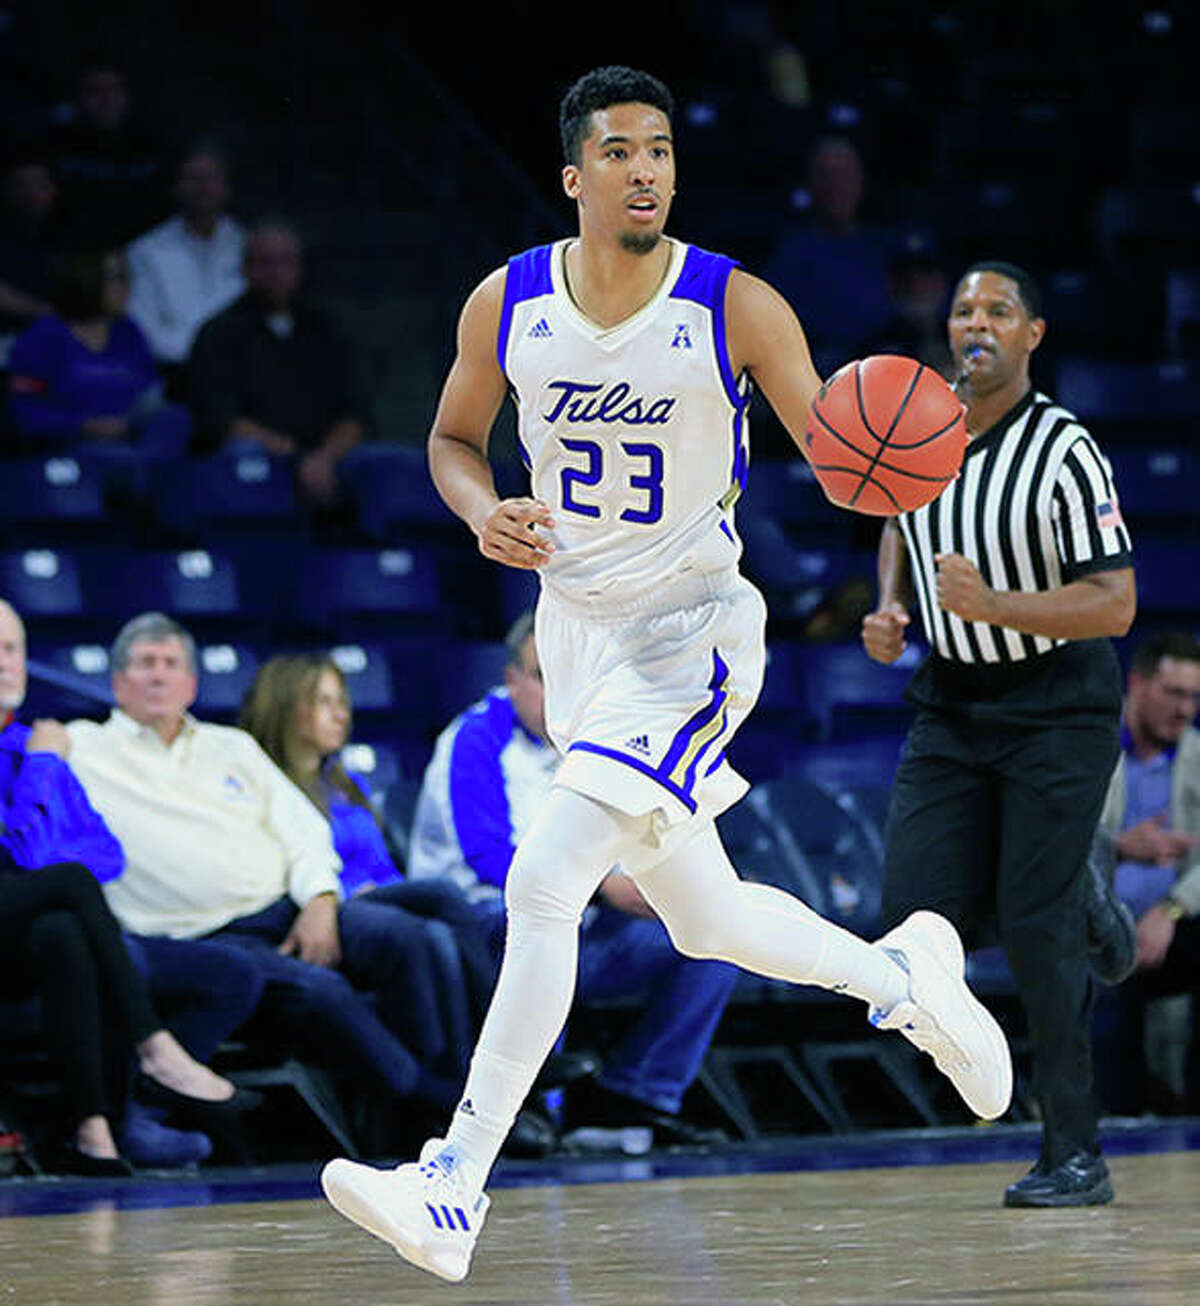 Former Riverview Gardens High standout and Saint Louis University player Zeke Moore will transfer from Tulsa to SIUE next season.